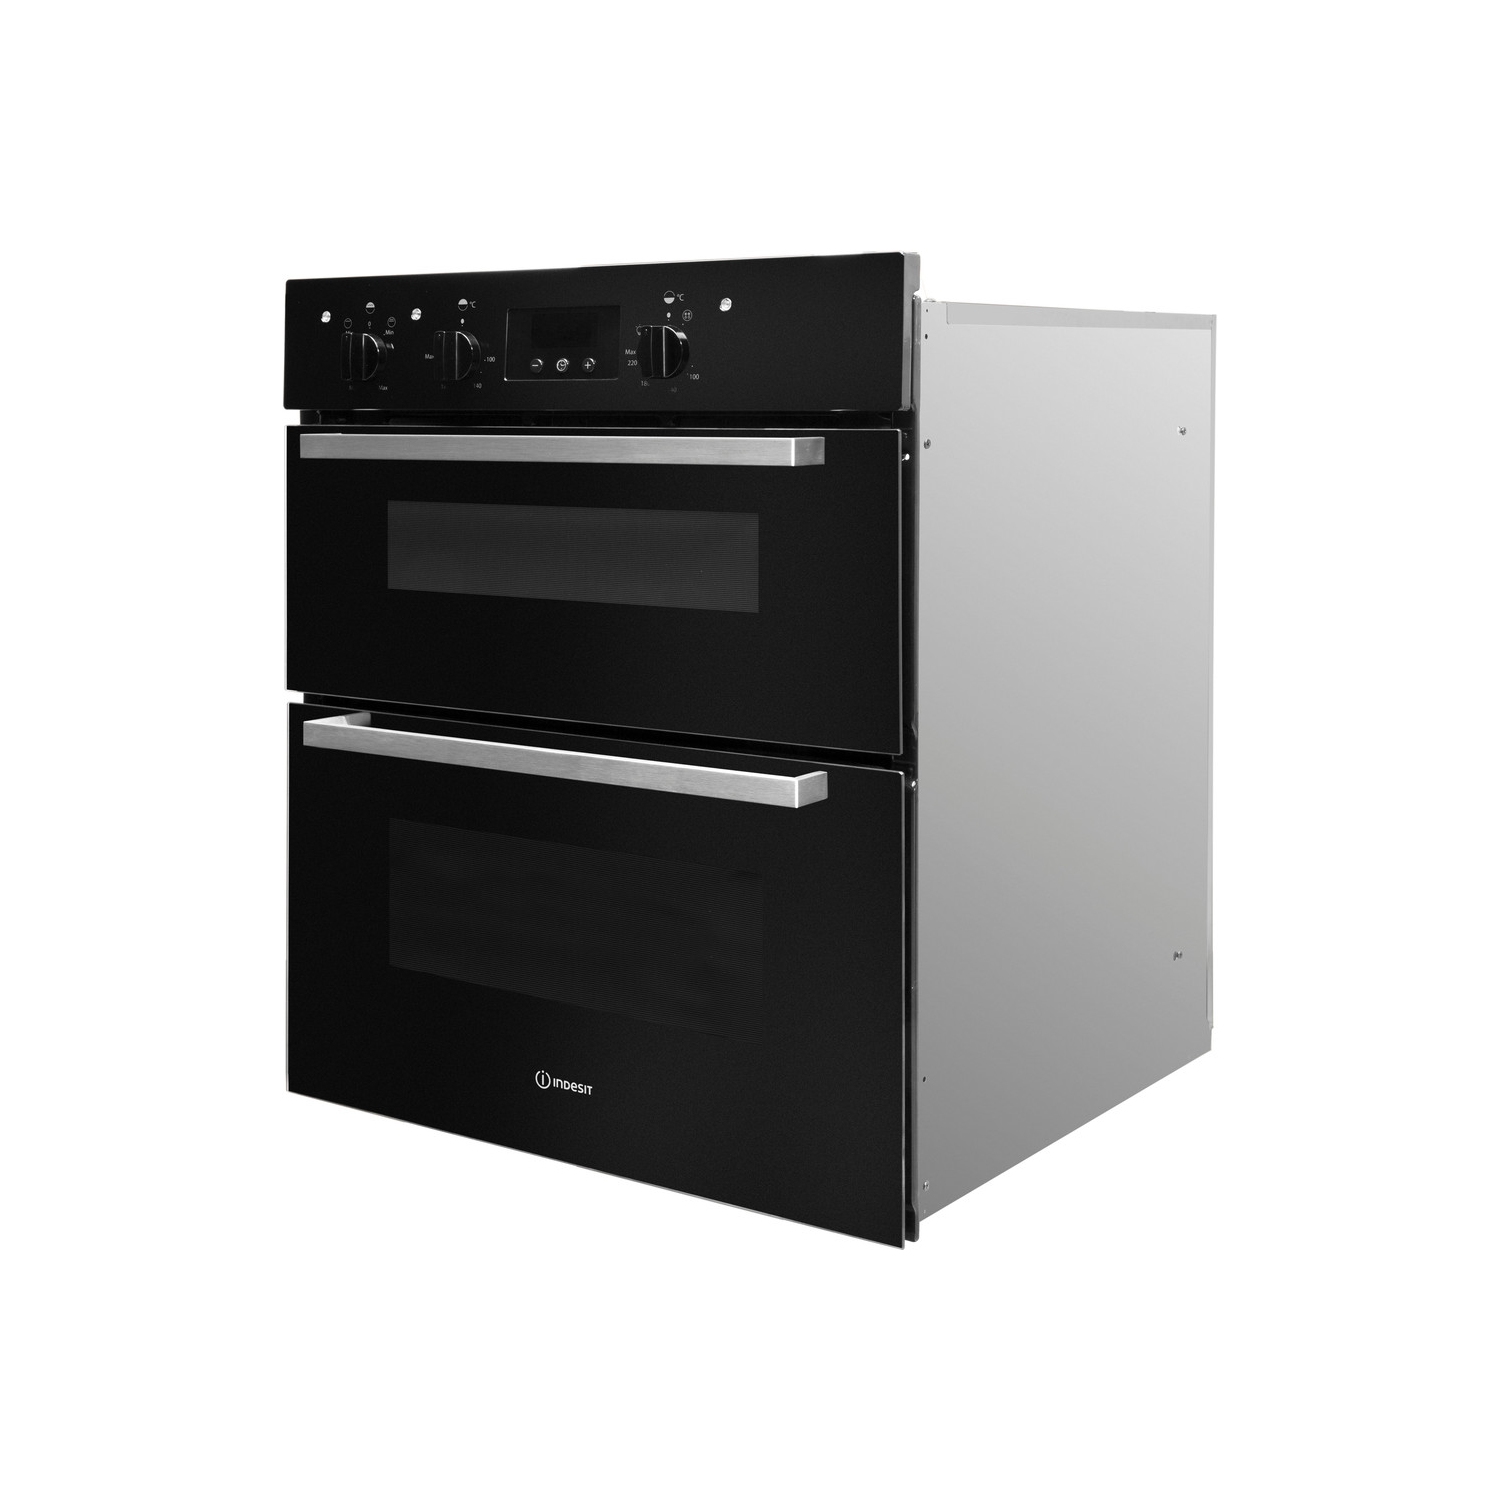 Indesit Built In Electric Double Oven - Black - B Rated - 3